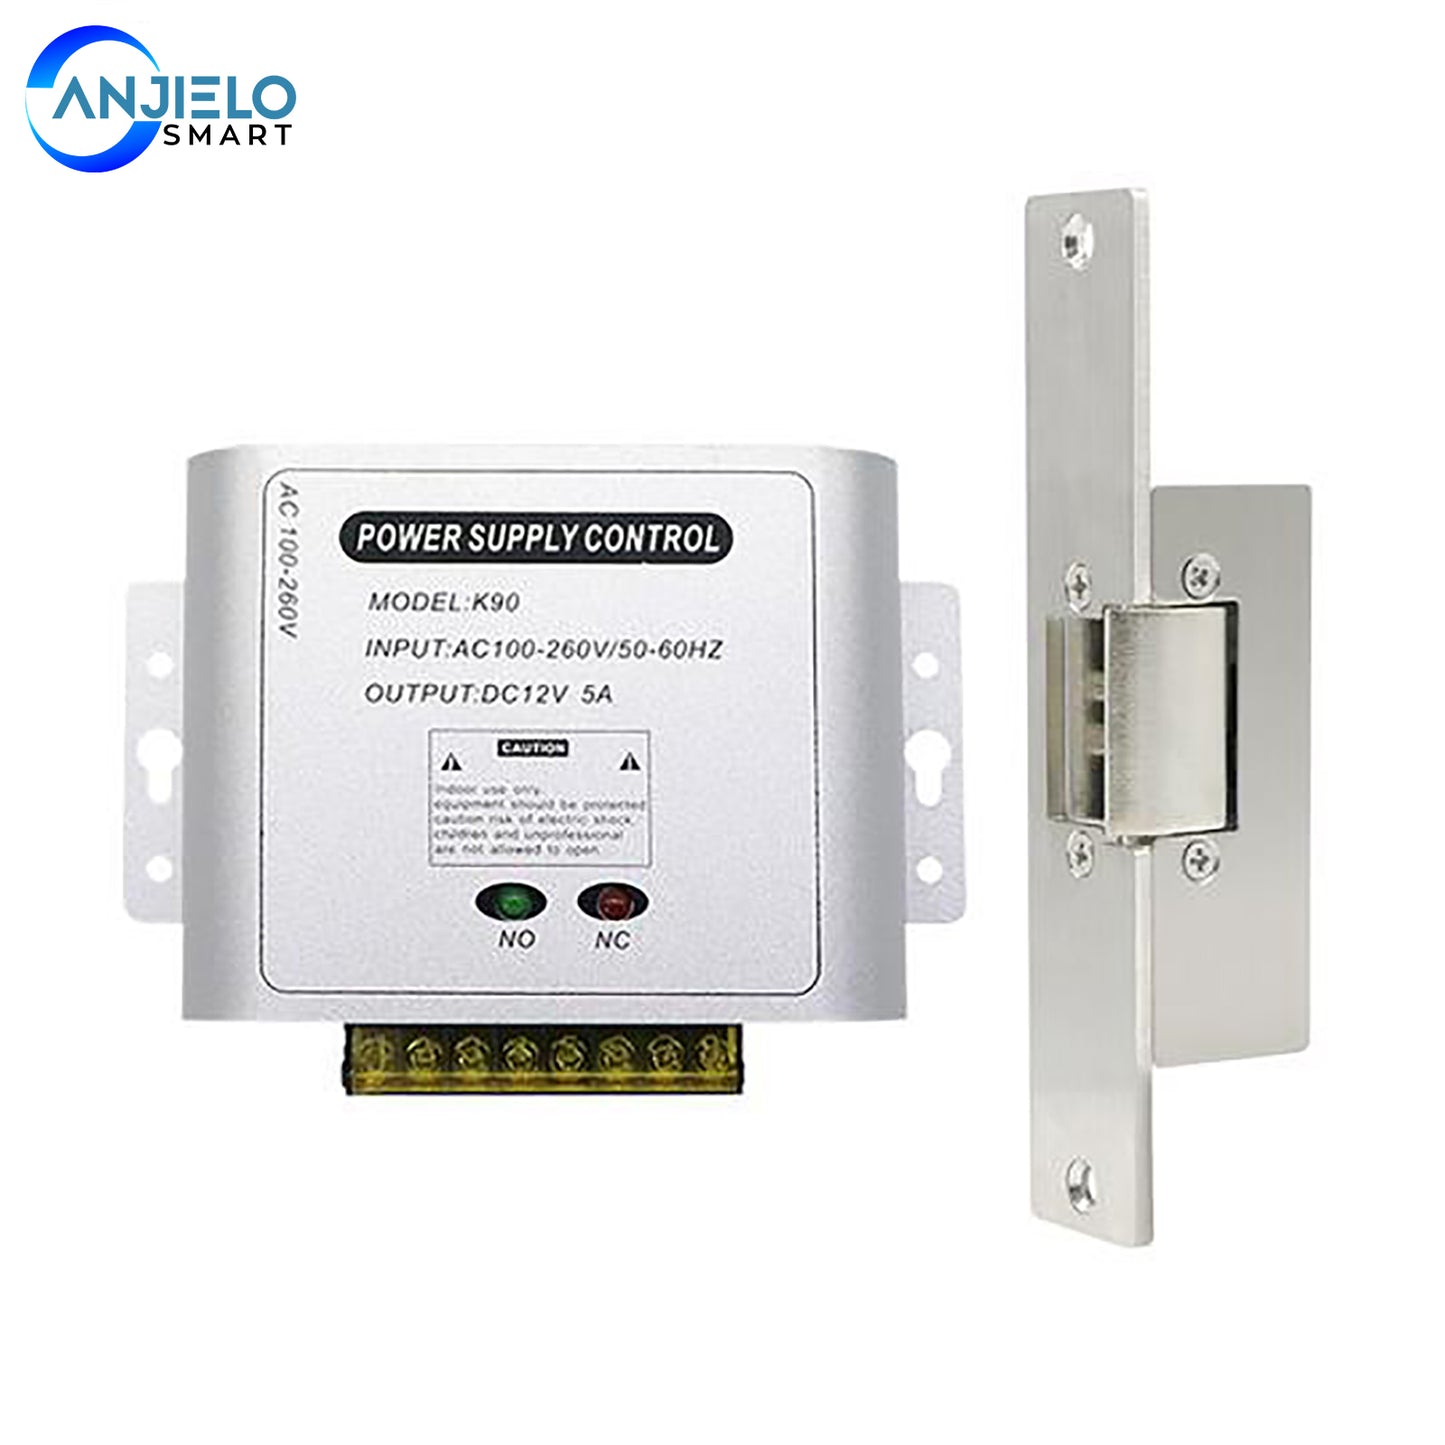 smart door lock Door Access System for Home Gate Electric Power Supply Control Miniature Power/Electric Lock Power/Access Control System